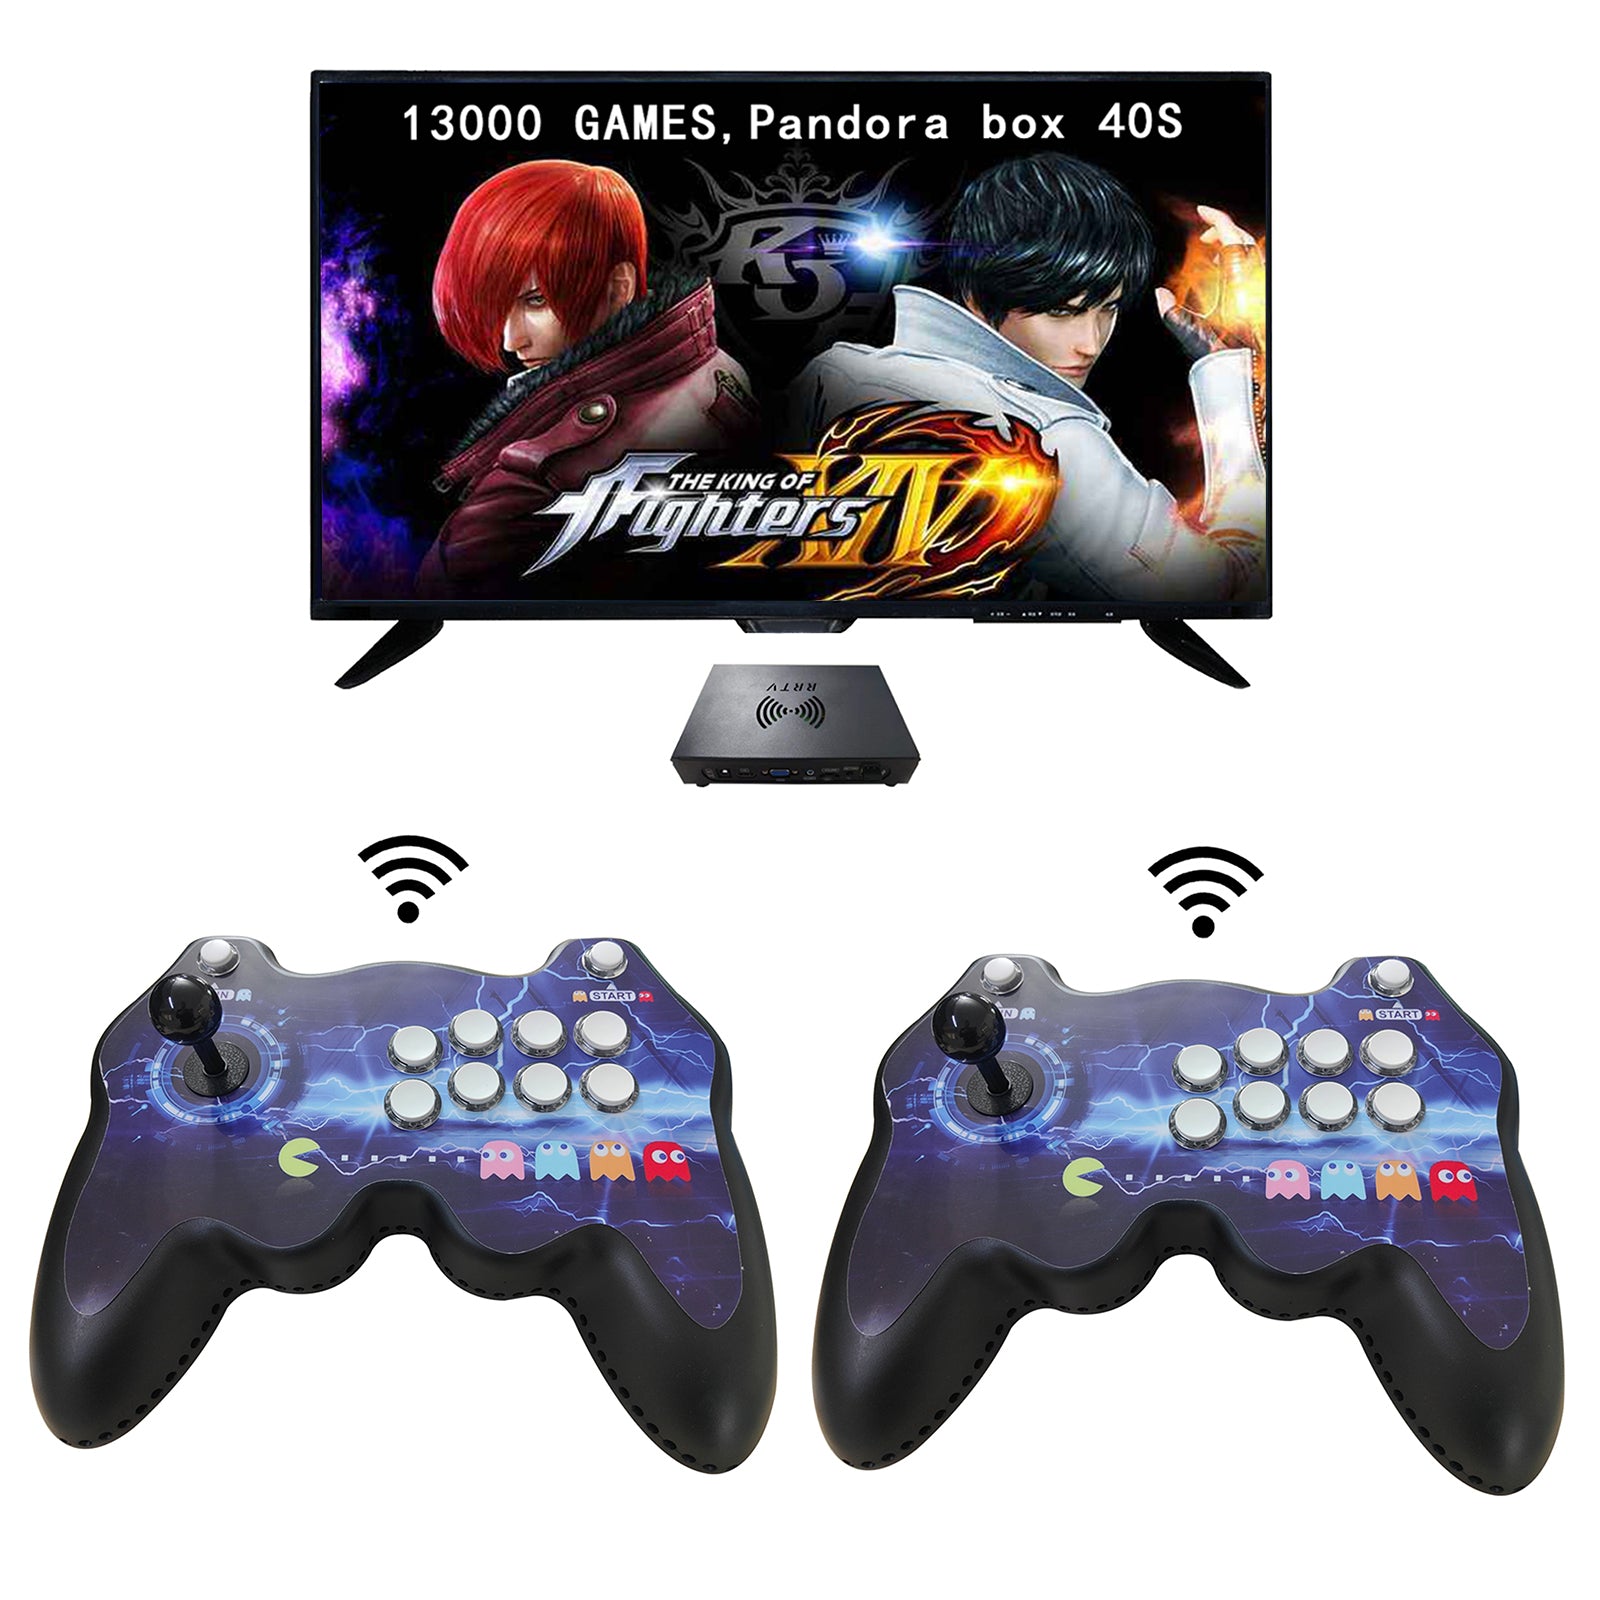 SAYFUT Retro Games 42631 IN 1, Pandora's Box 12s Arcade Game Console -  Double Joystick HD Arcade Games Machines for Home Online Games Console 